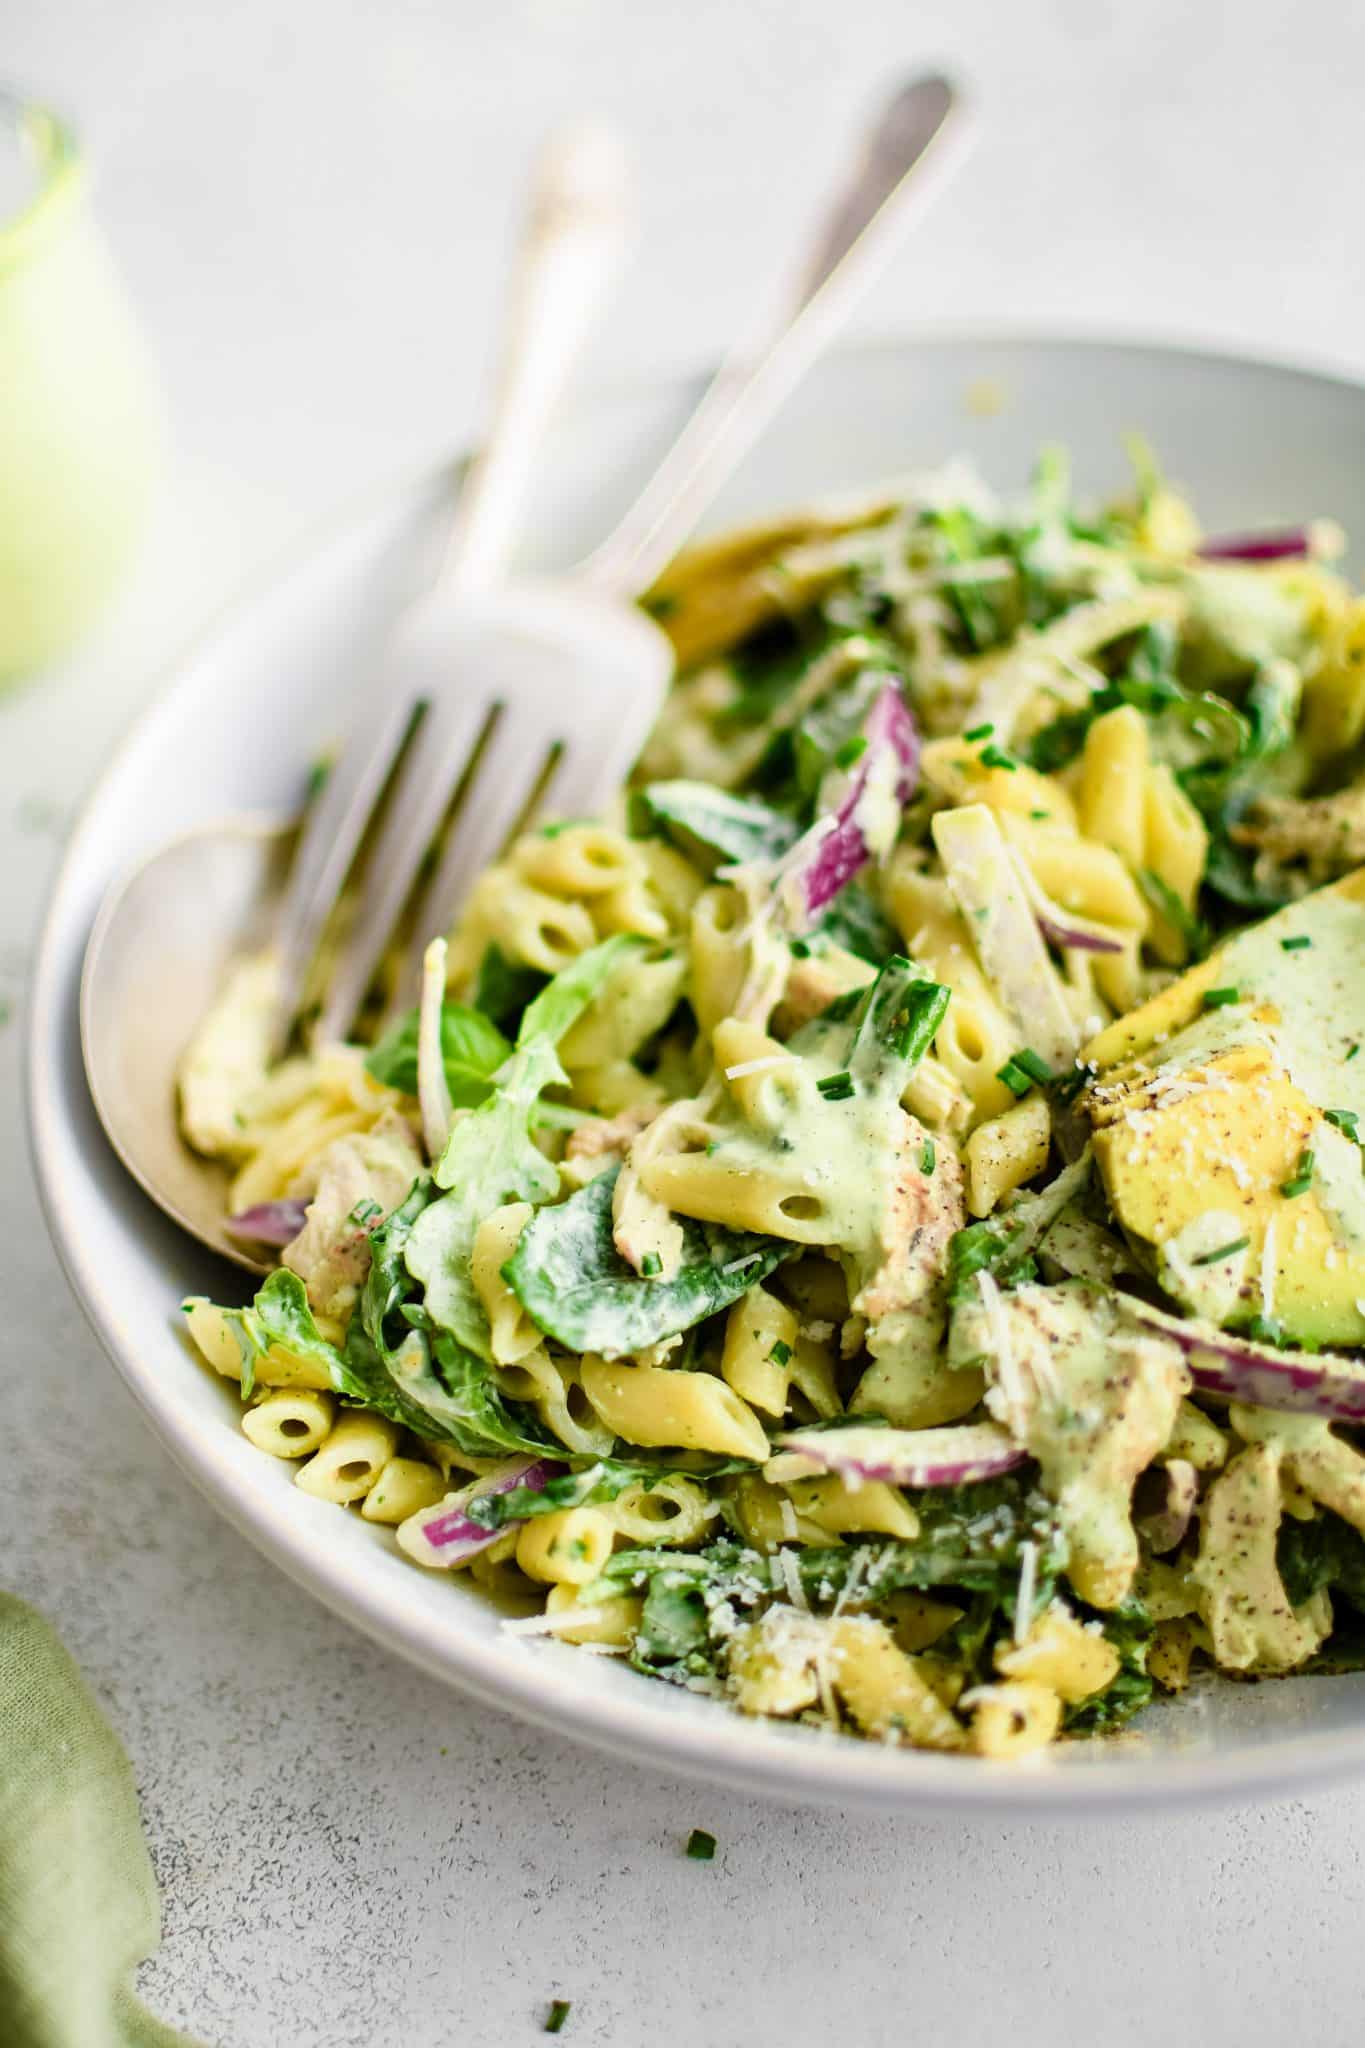 Large white serving bowl filled with creamy green goddess pasta salad made with short penne pasta, shredded chicken, sliced red onion, fresh spinach, arugula, and avocado all tossed in homemade green goddess dressing.